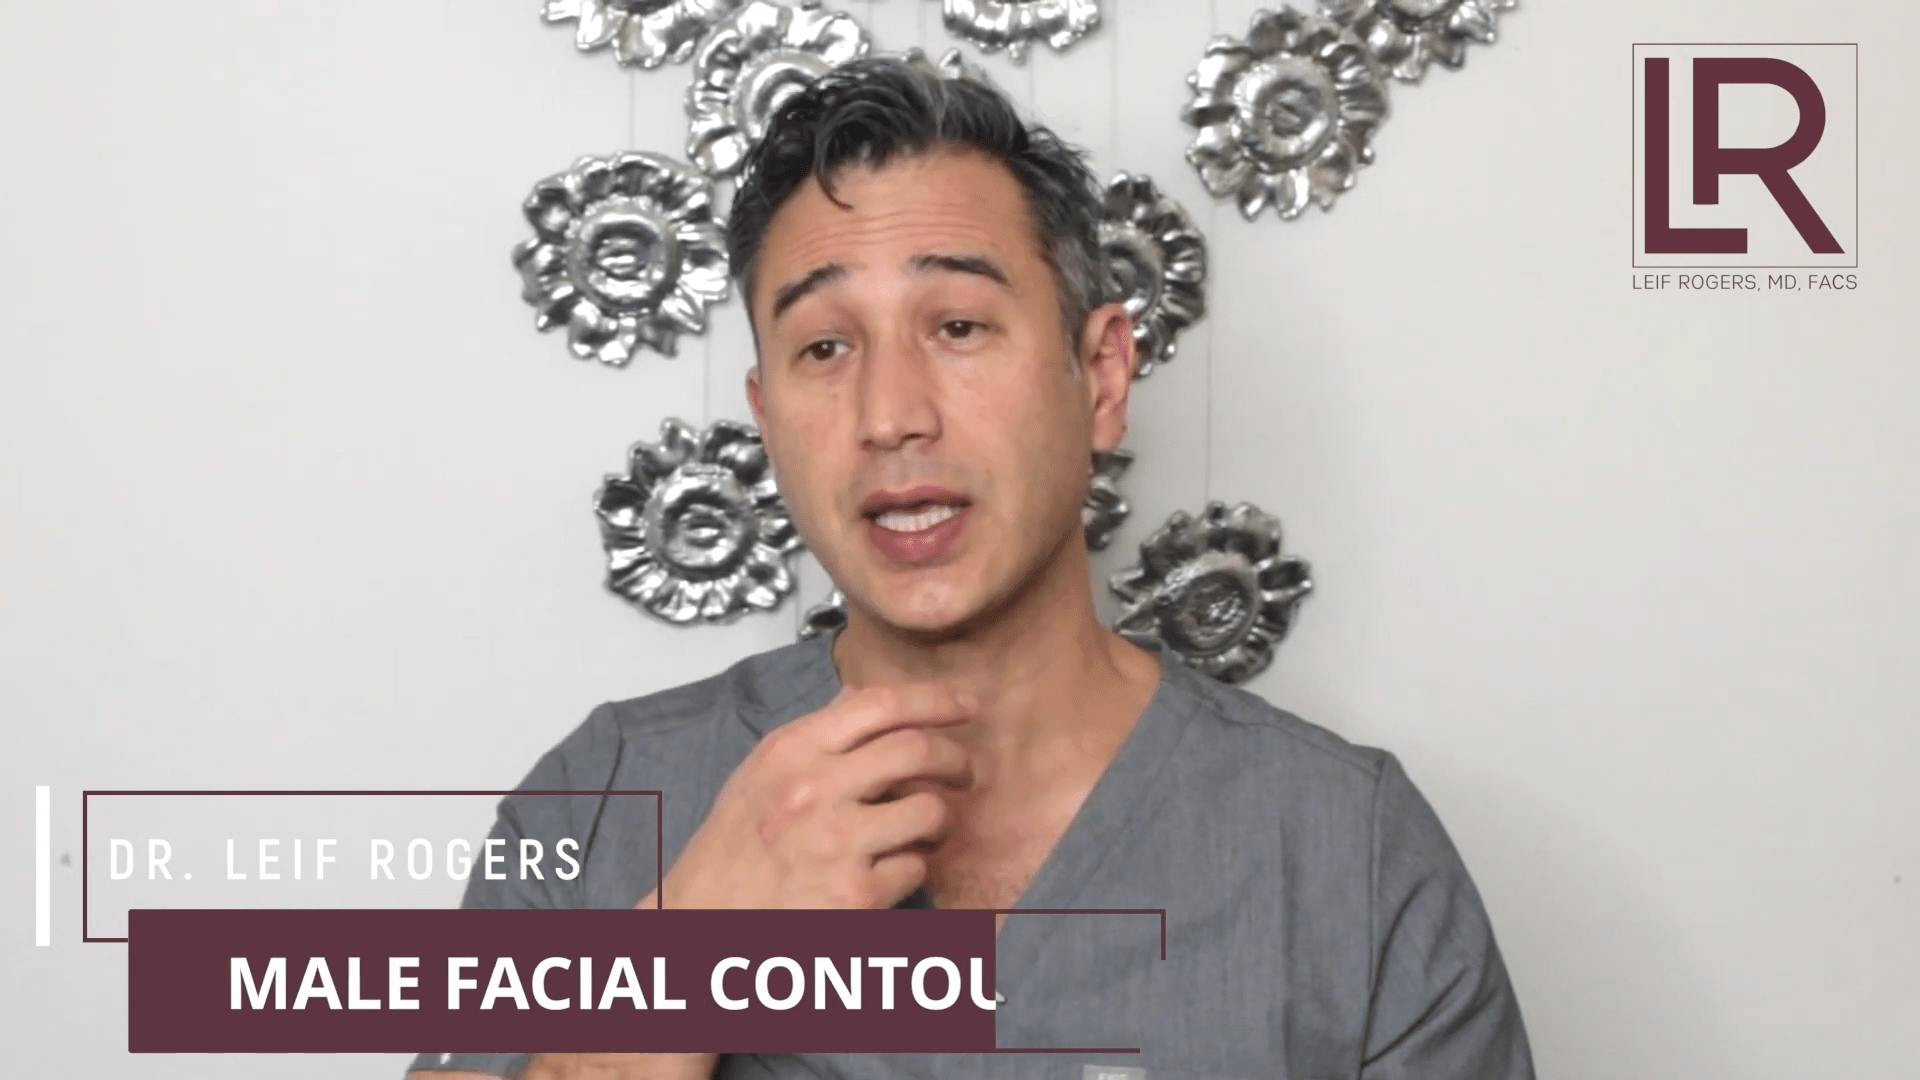 Dr. Leif Rogers talking about male facial contouring